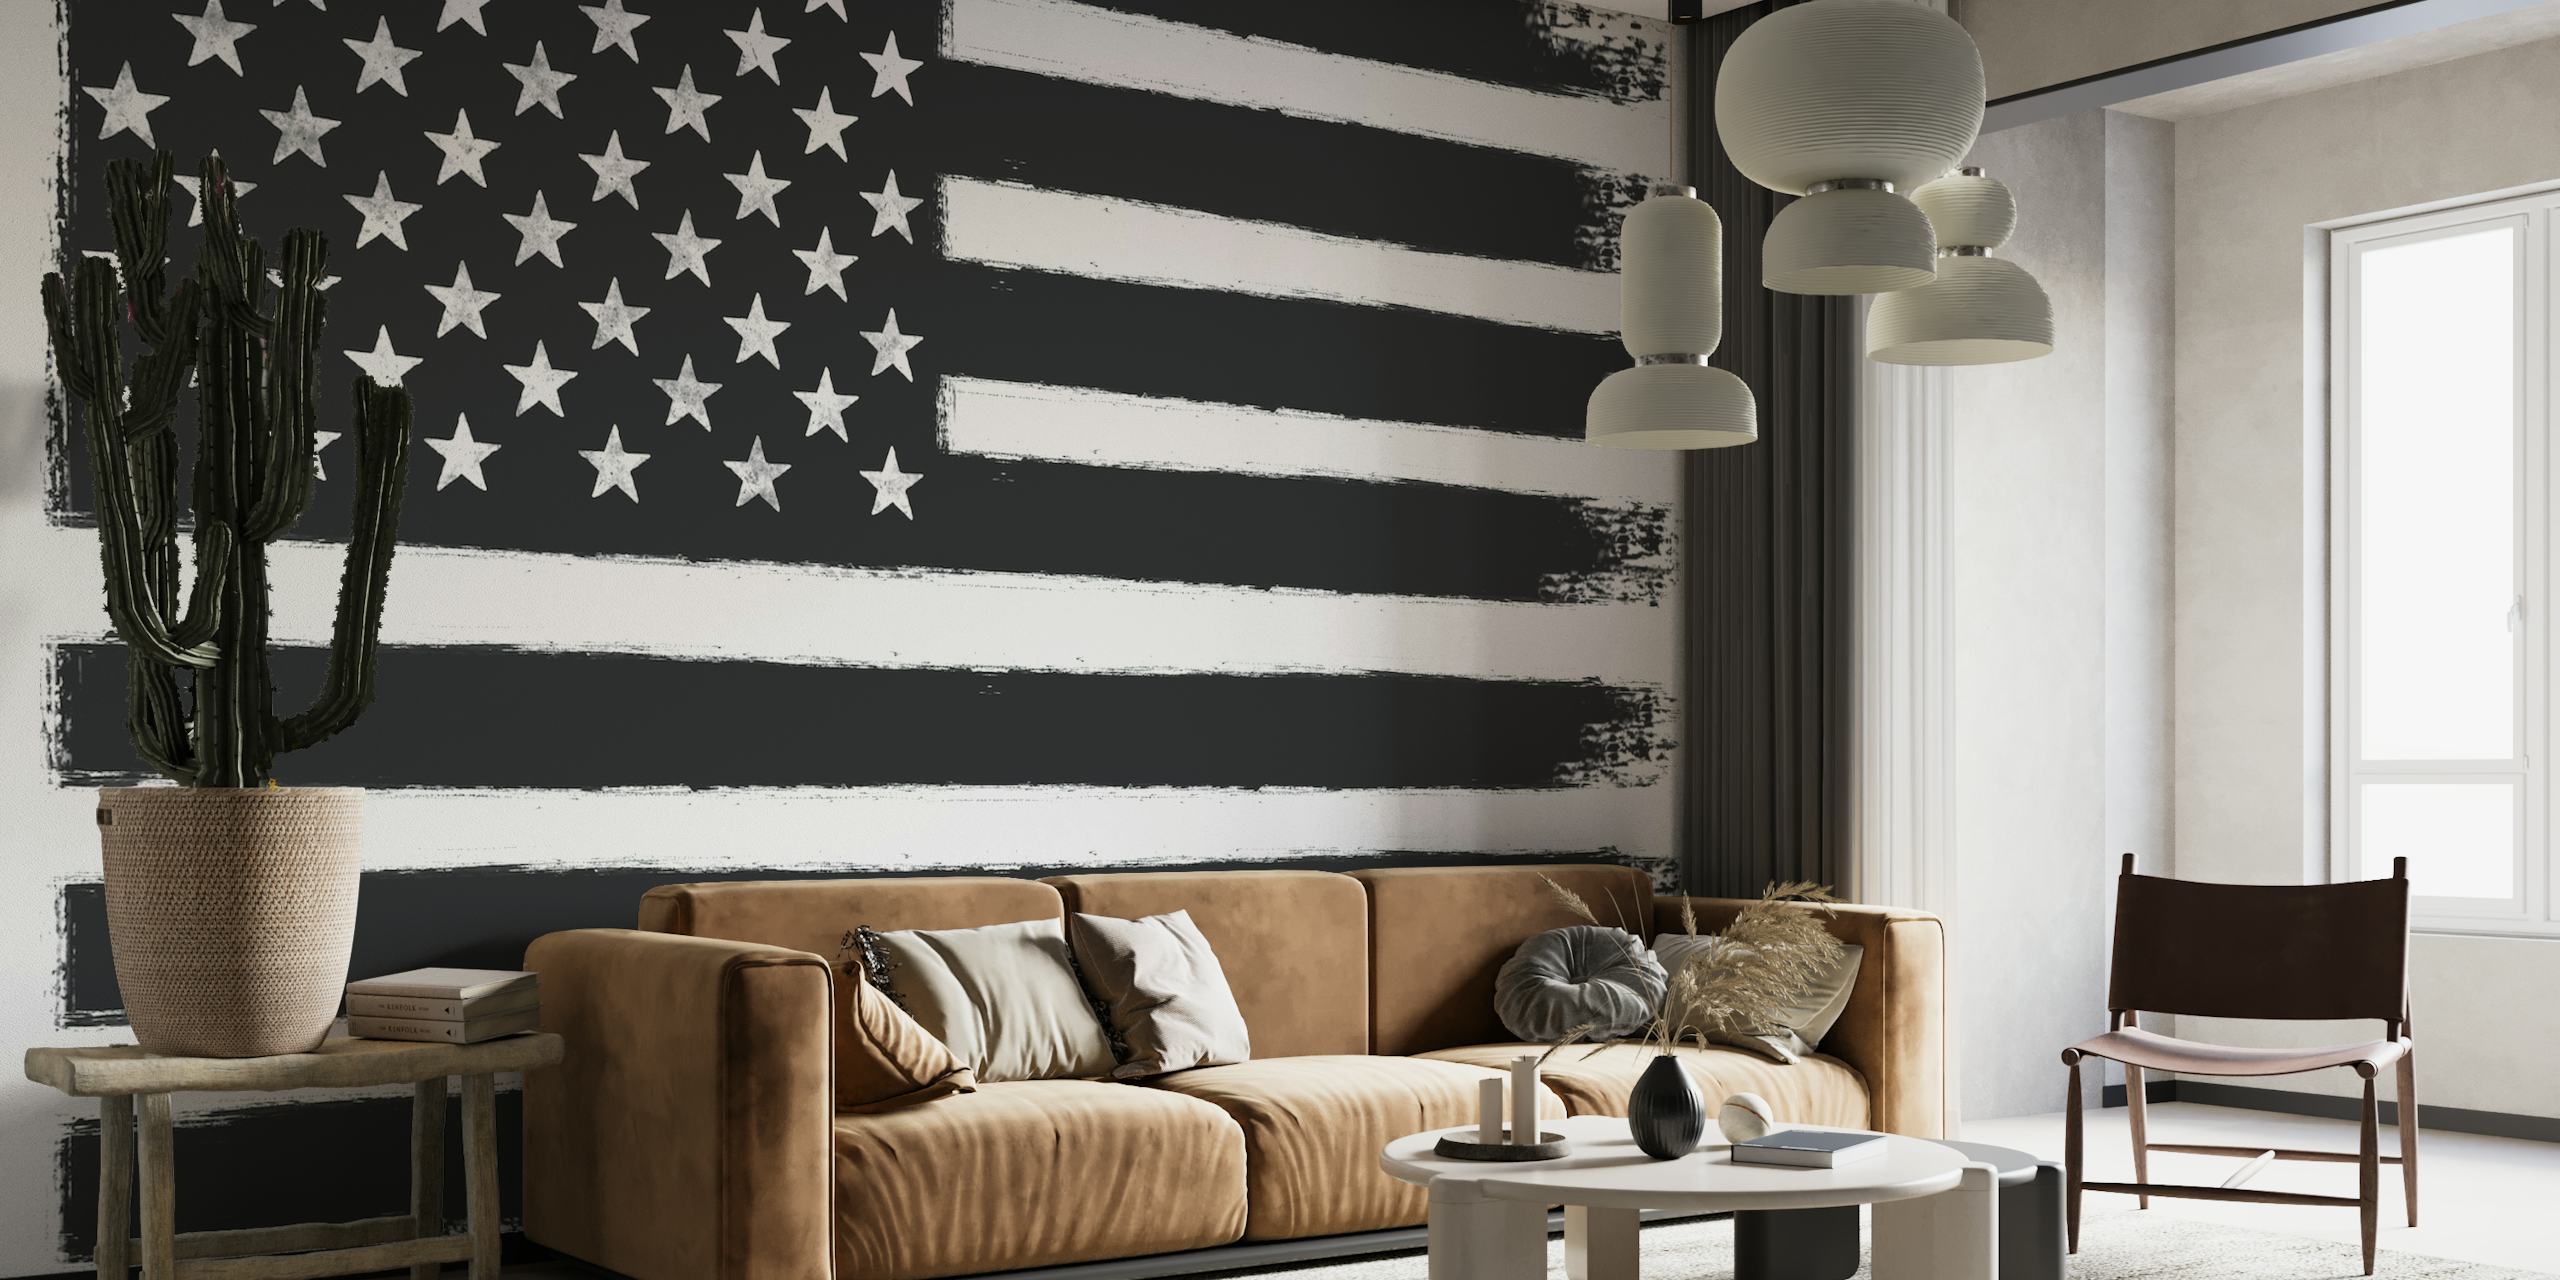 USA flag in black and white as a wall mural